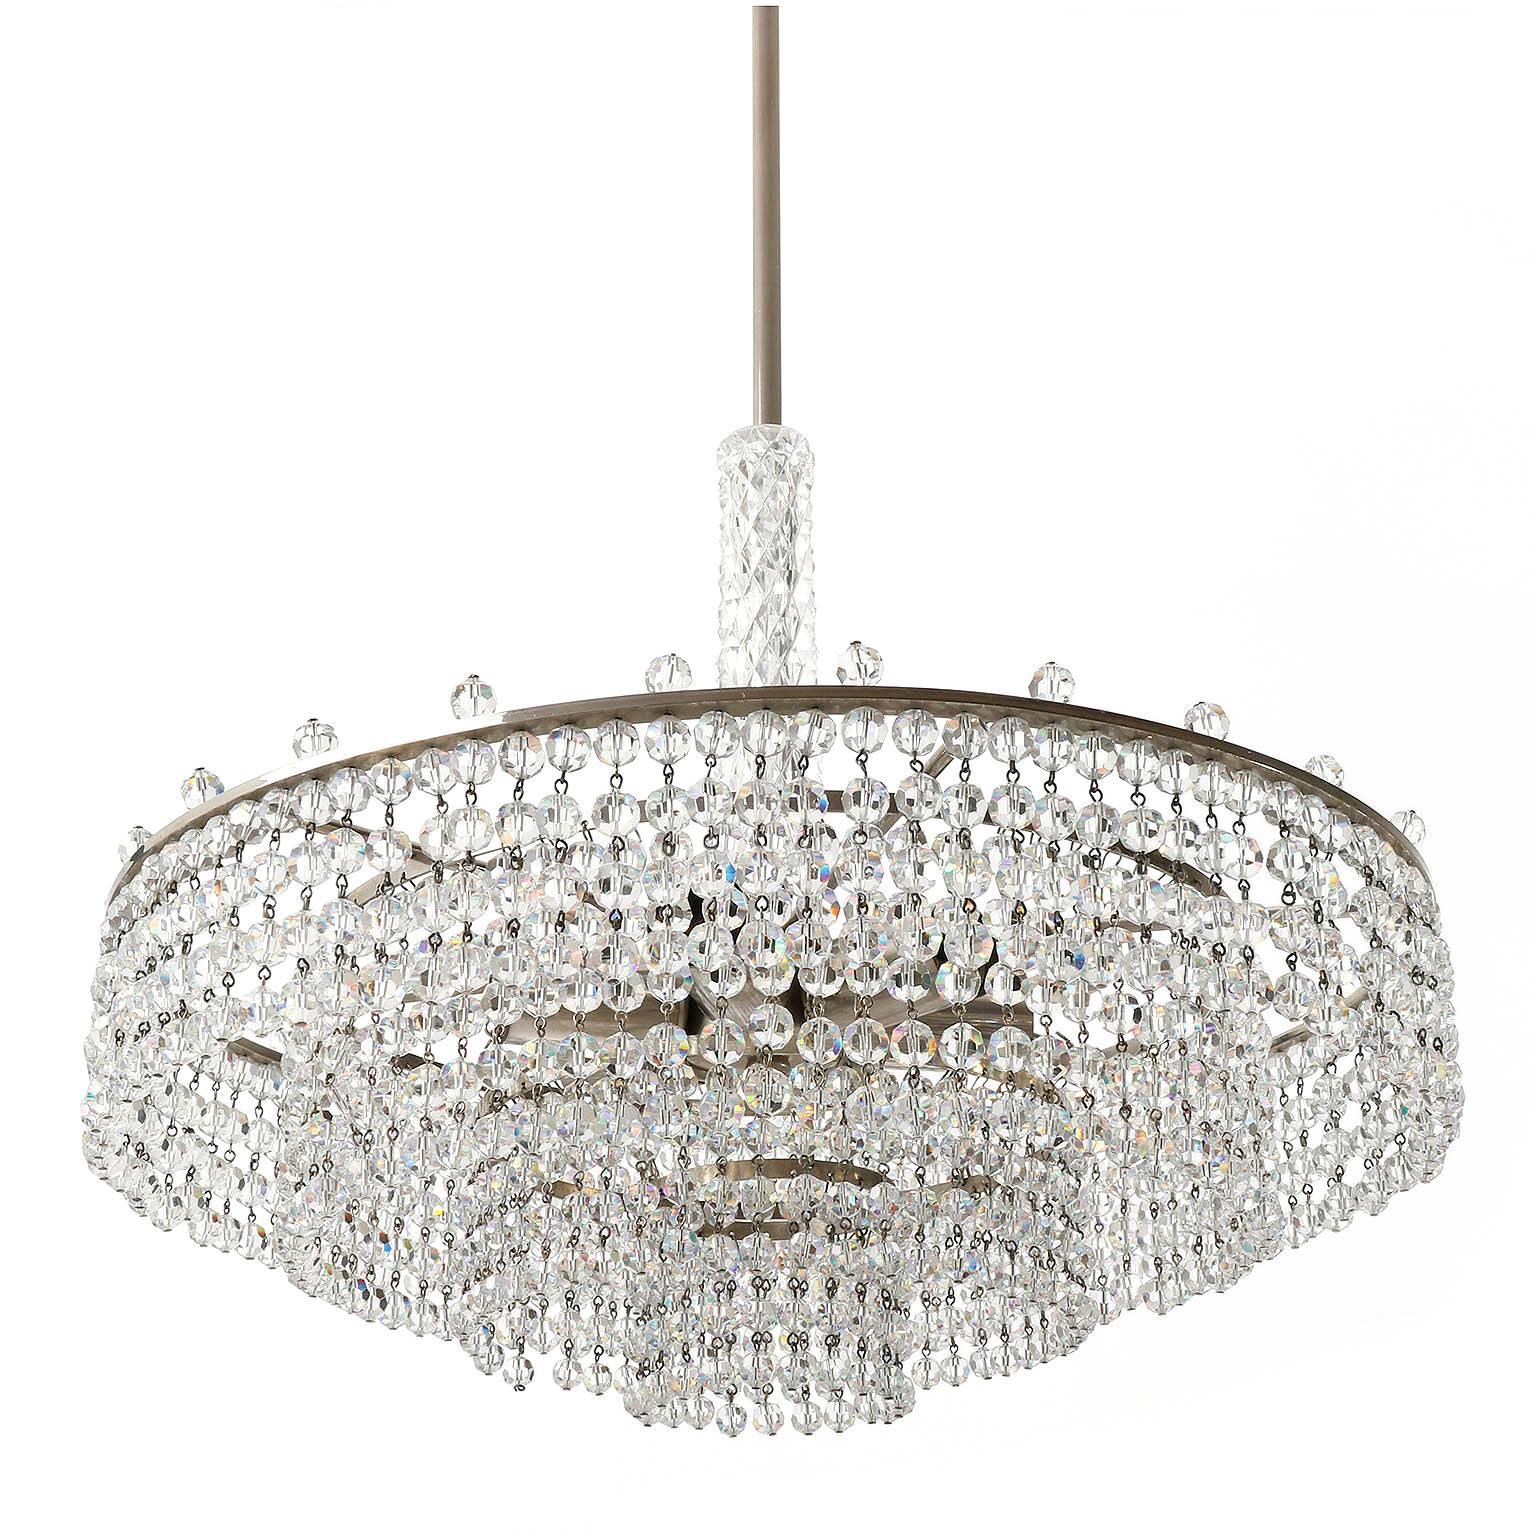 Mid-Century Modern Palwa Chandelier, Nickel Cut Crystal Glass, Germany, 1960s For Sale